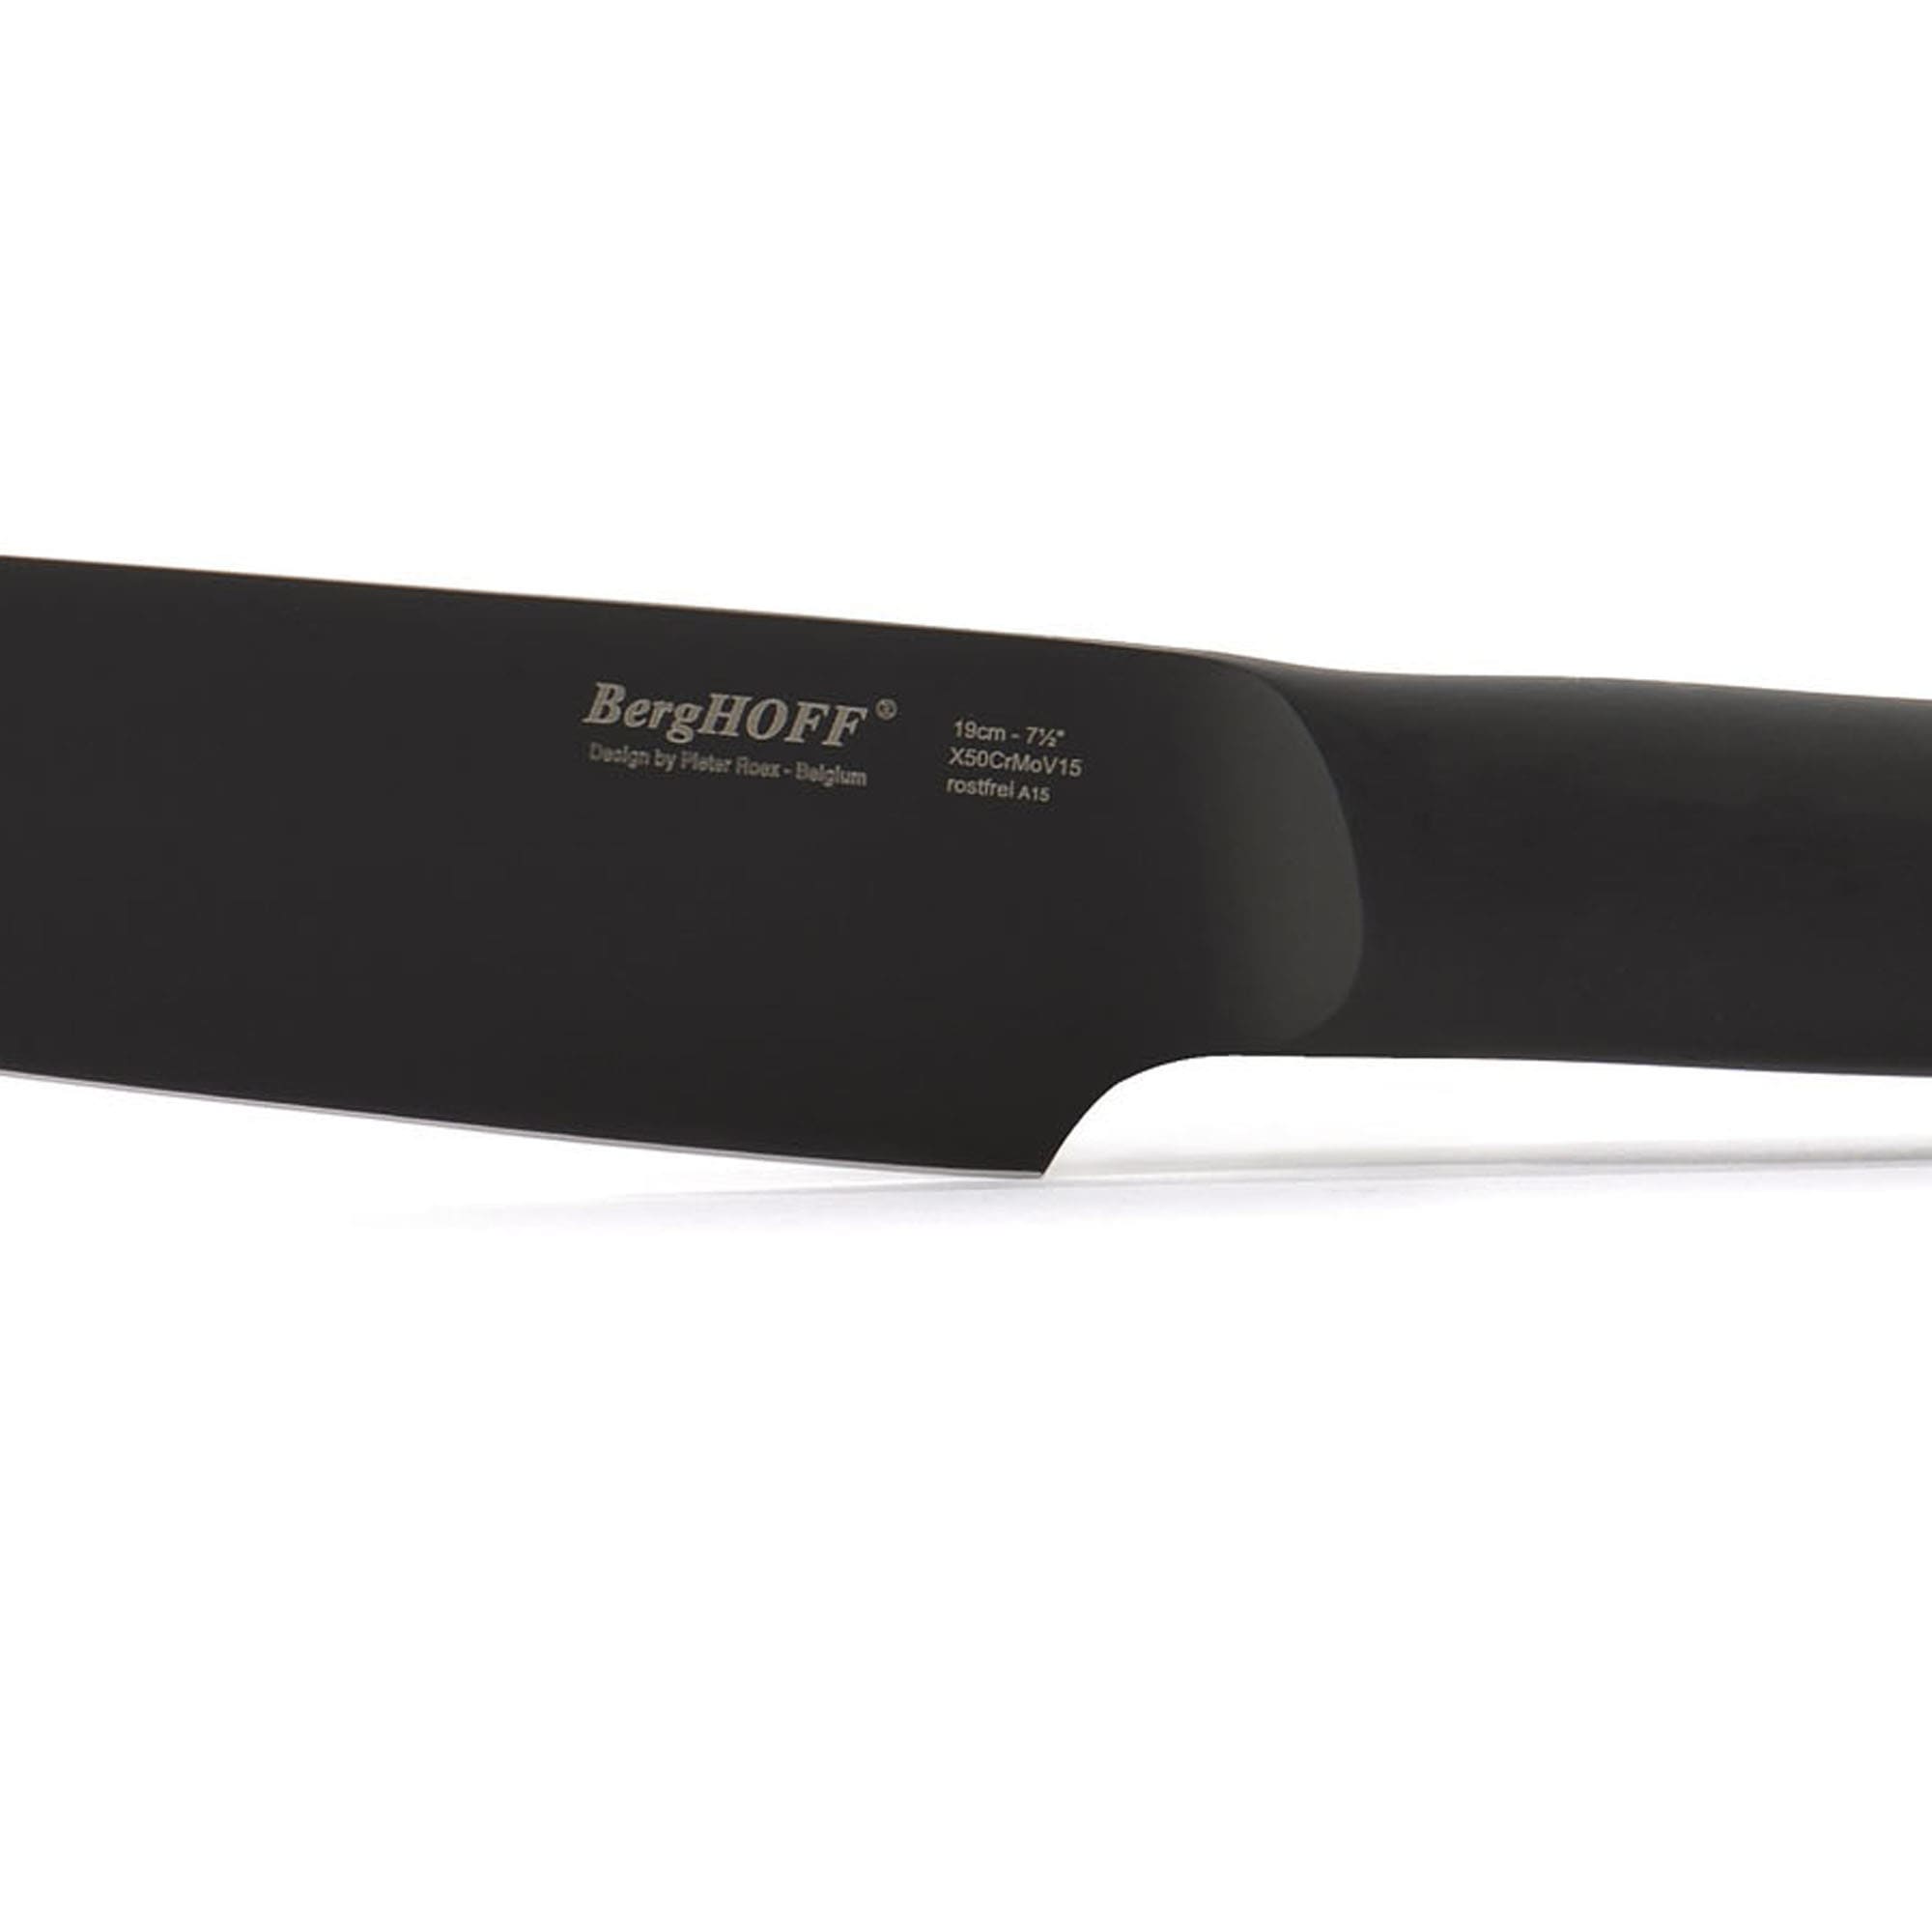 https://ak1.ostkcdn.com/images/products/13328471/BergHOFF-Ron-Black-Stainless-Steel-7.5-inch-Carving-Knife-6922edda-5d09-4ed2-98f6-73a807b1f9a1.jpg